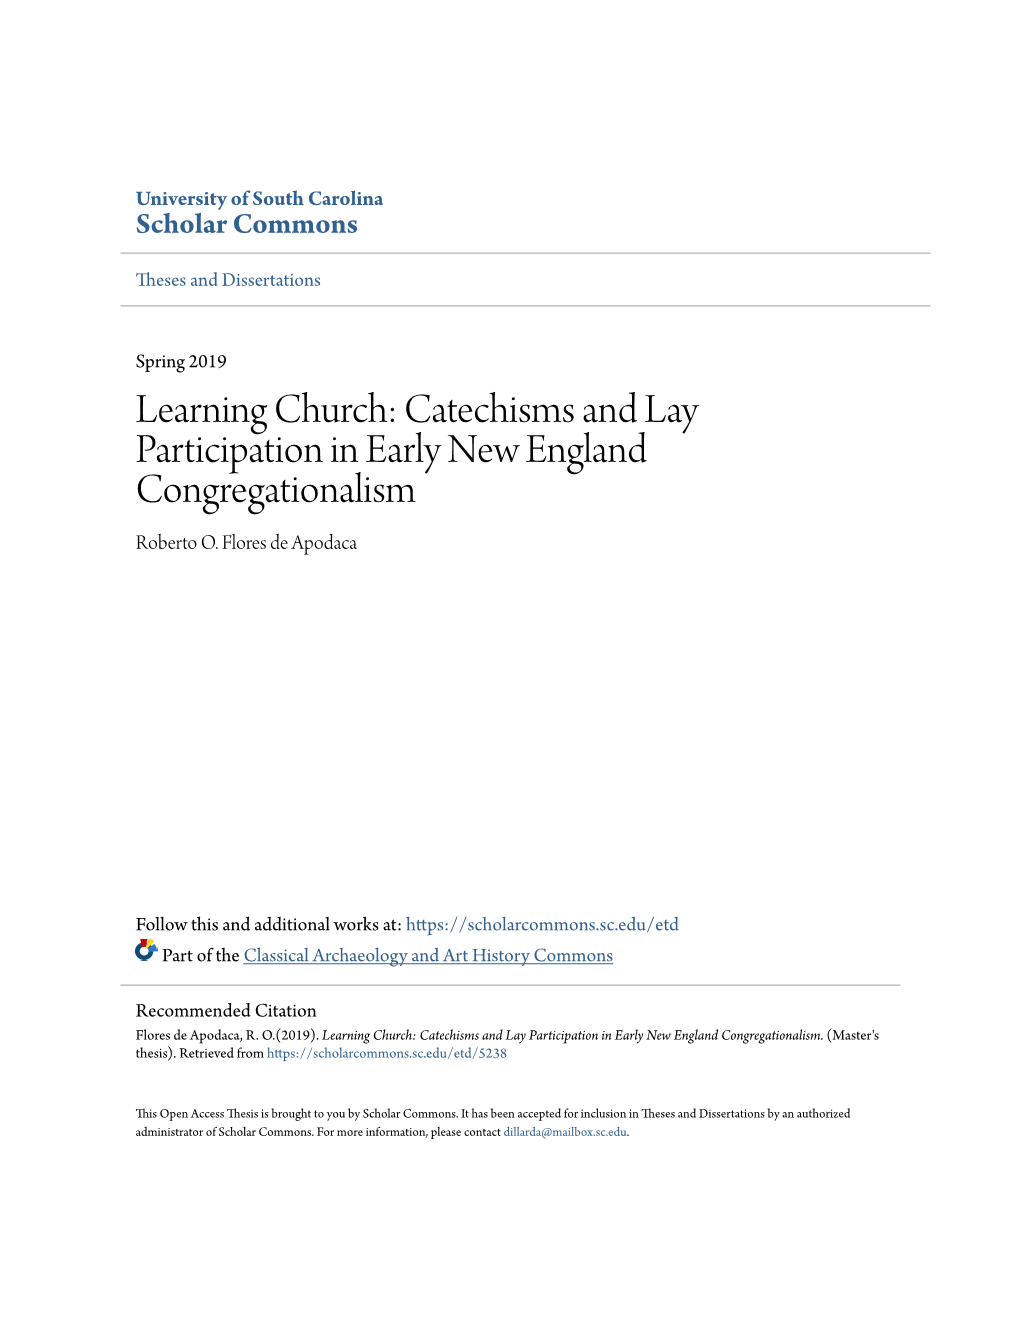 Learning Church: Catechisms and Lay Participation in Early New England Congregationalism Roberto O